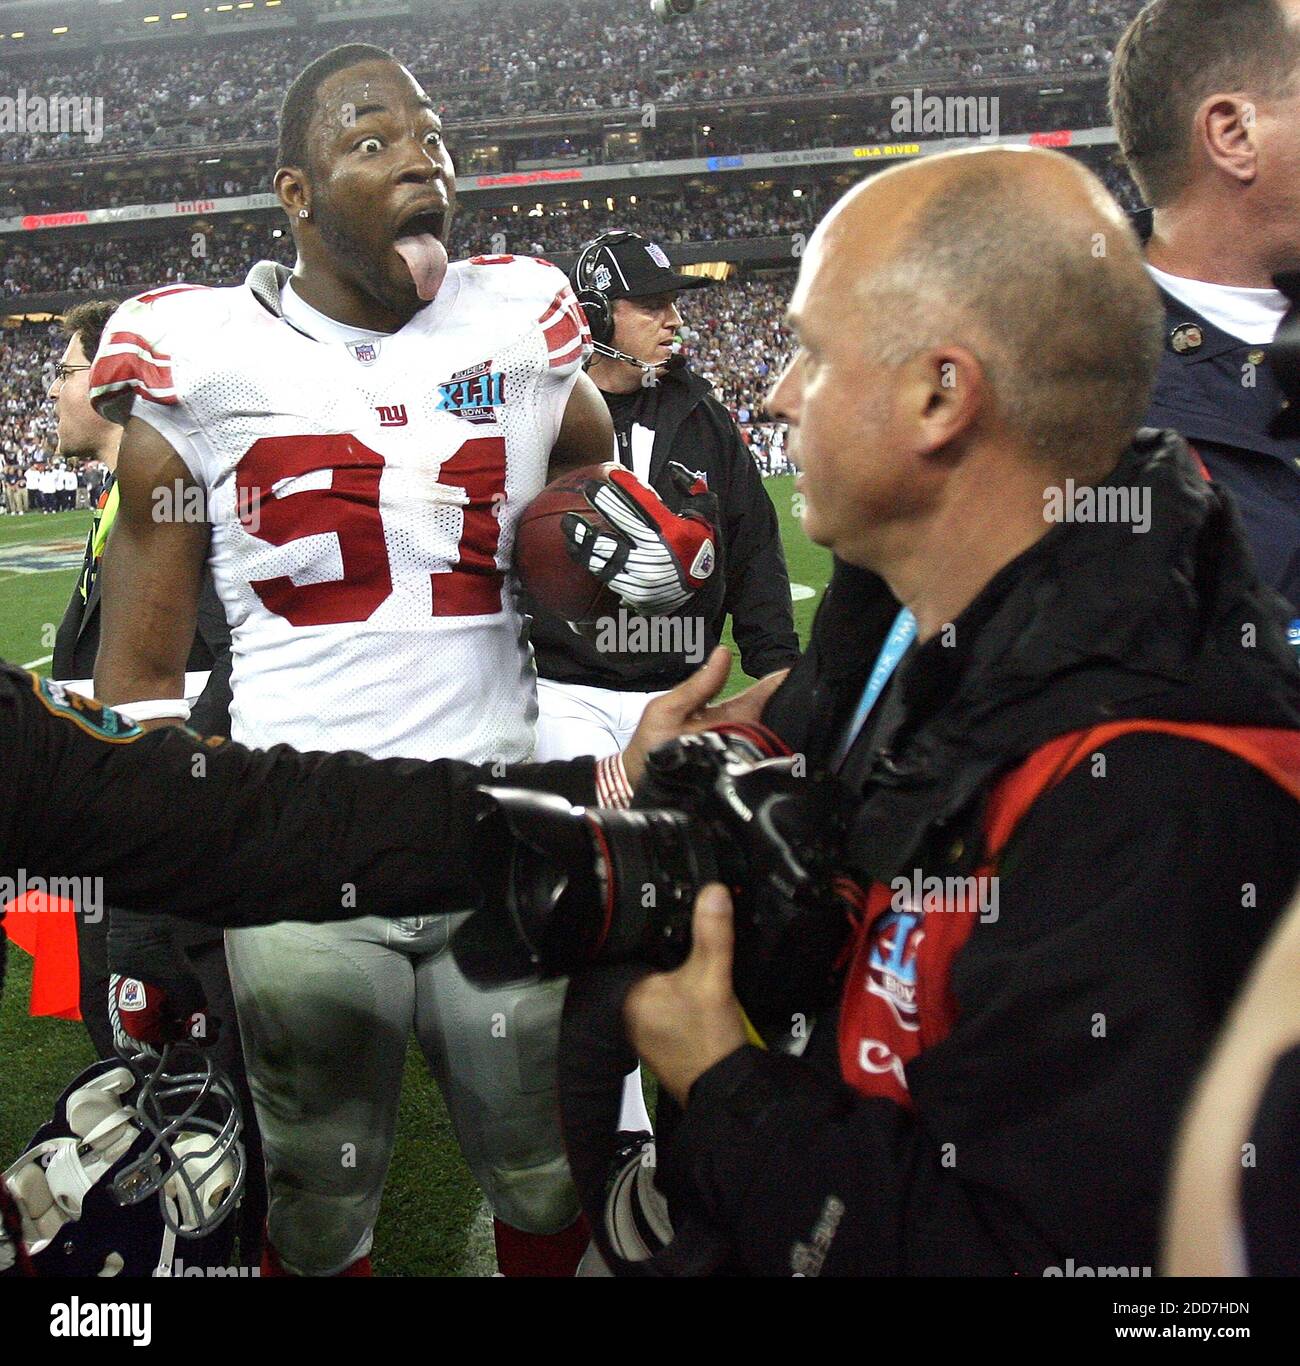 The New York Giants' Justin Tuck (91) celebrates after a 17-14 Giants' victory in Super Bowl XLII at University of Phoenix Stadium in Glendale, AZ, USA on February 3, 2008.  The NY Giants won 17-14. Photo by Gary W. Green/MCT/Cameleon/ABACAPRESS.COM Stock Photo